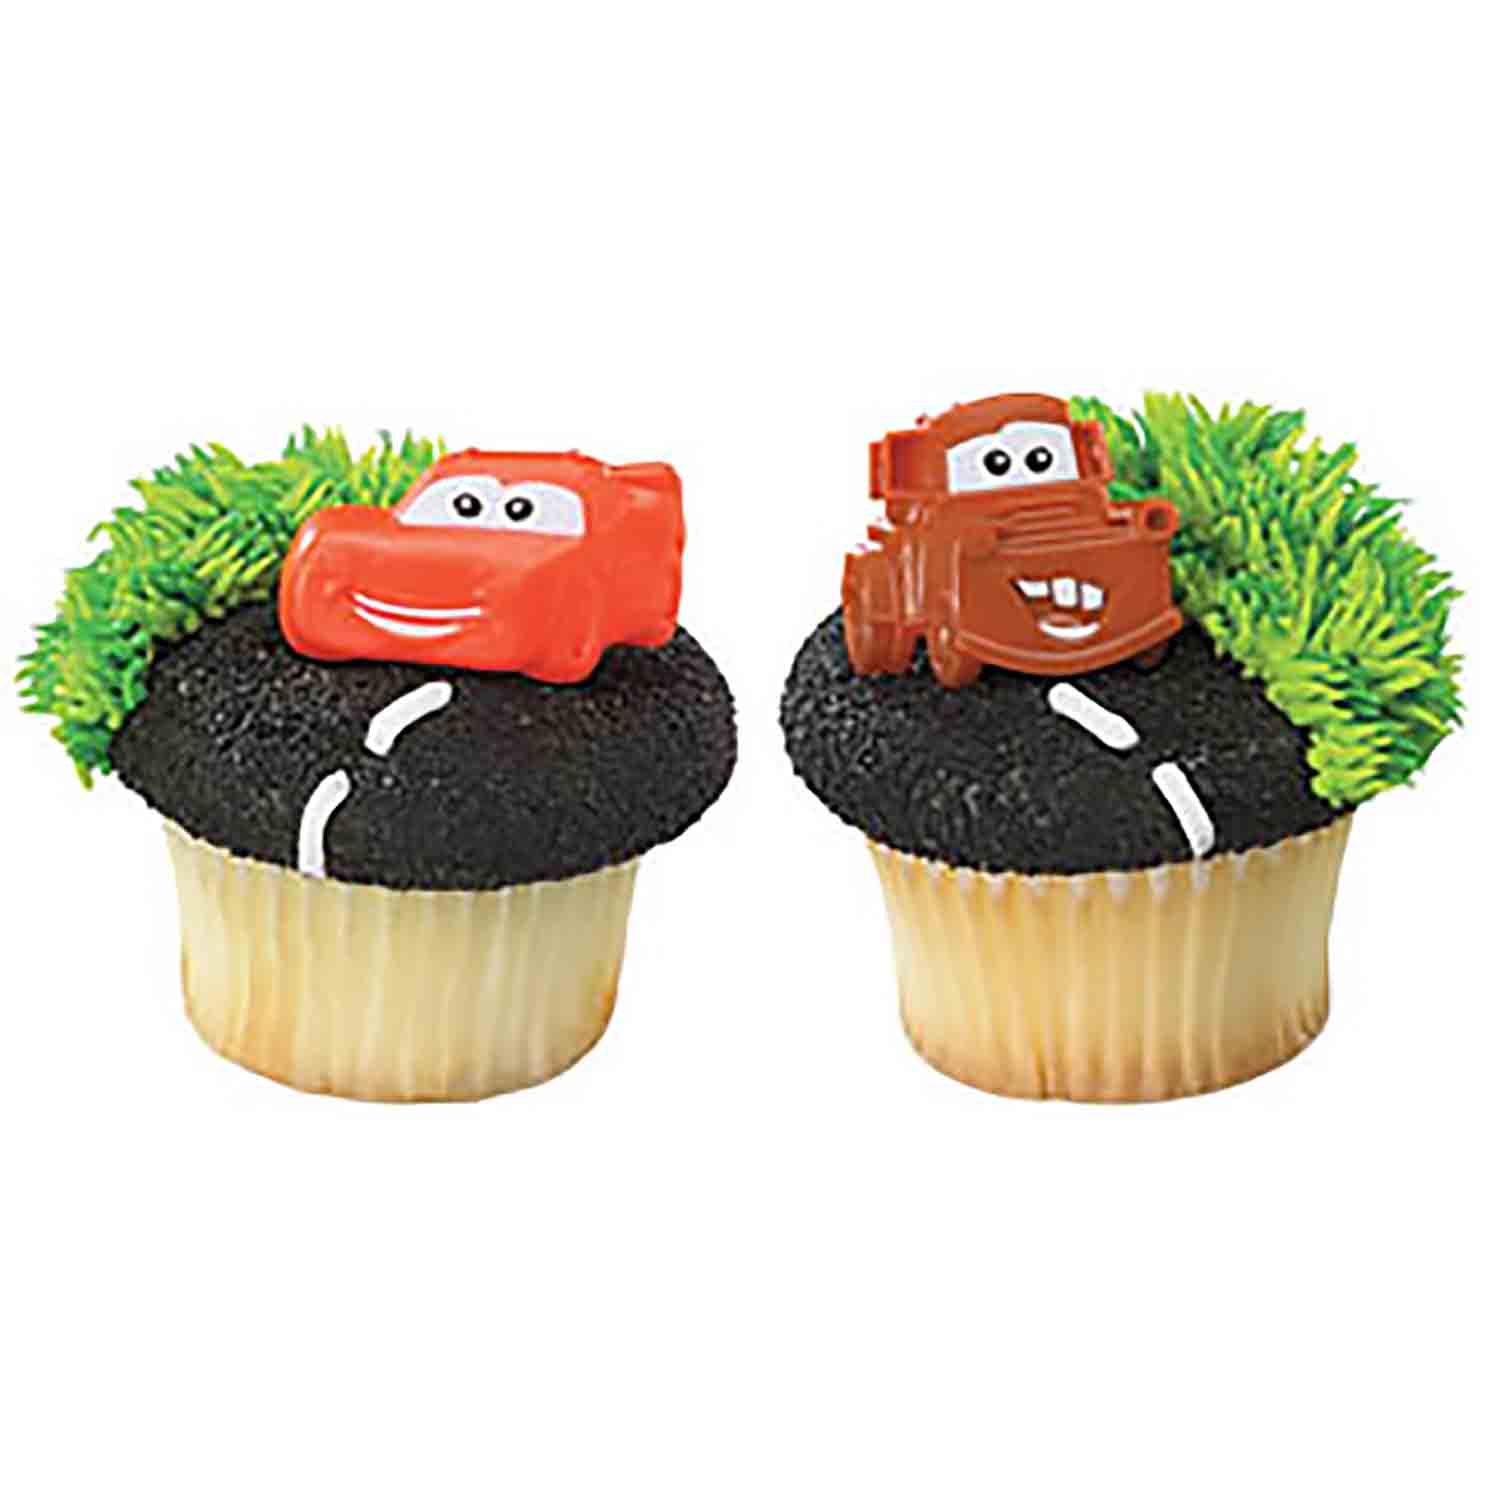 Mater and McQueen Cars Cupcake Toppers